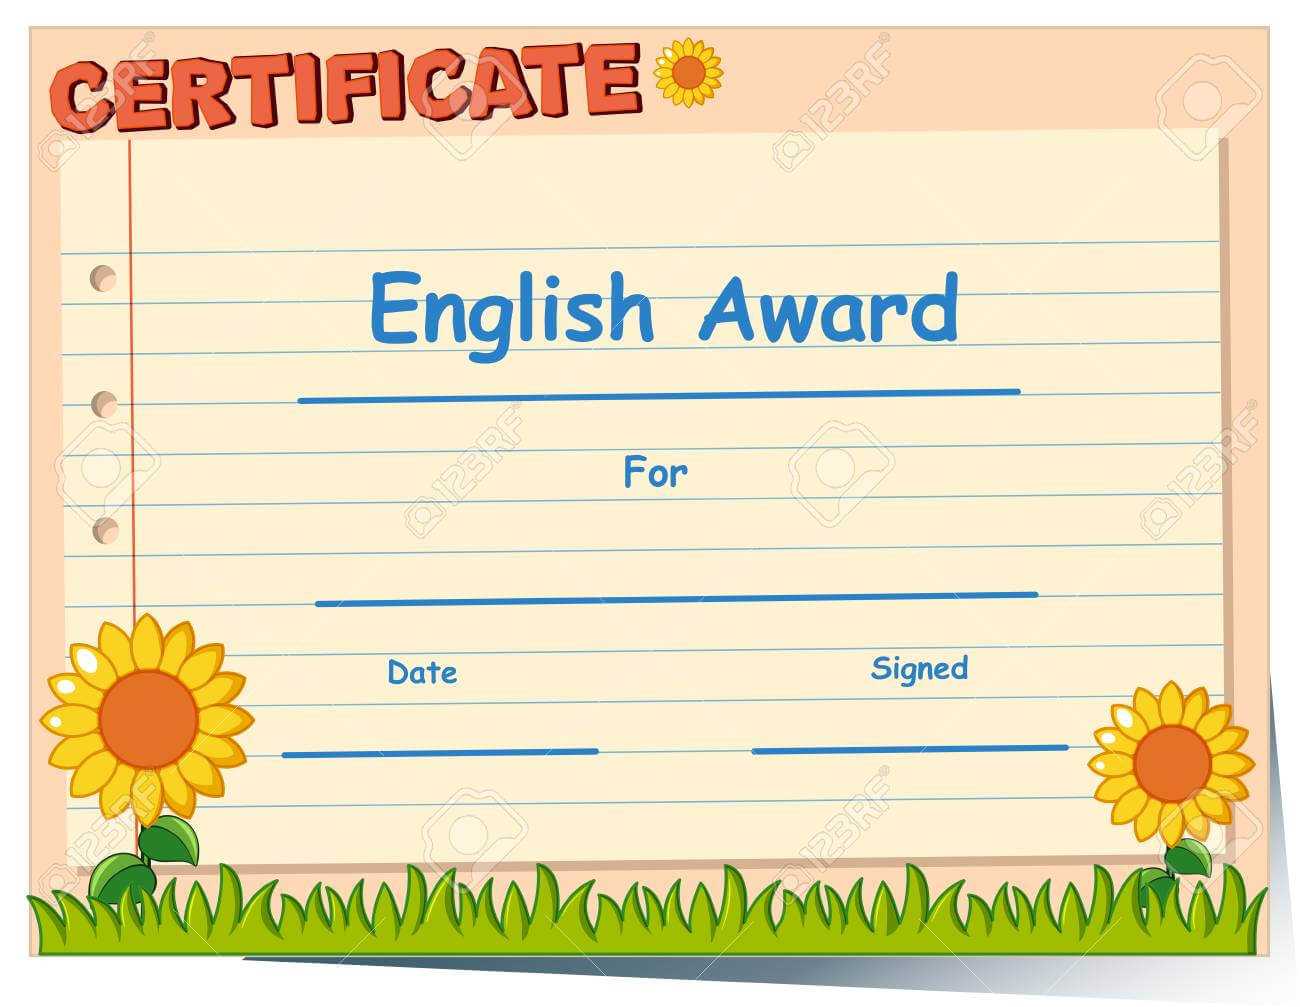 Certificate Template For English Award Illustration Intended For Free 